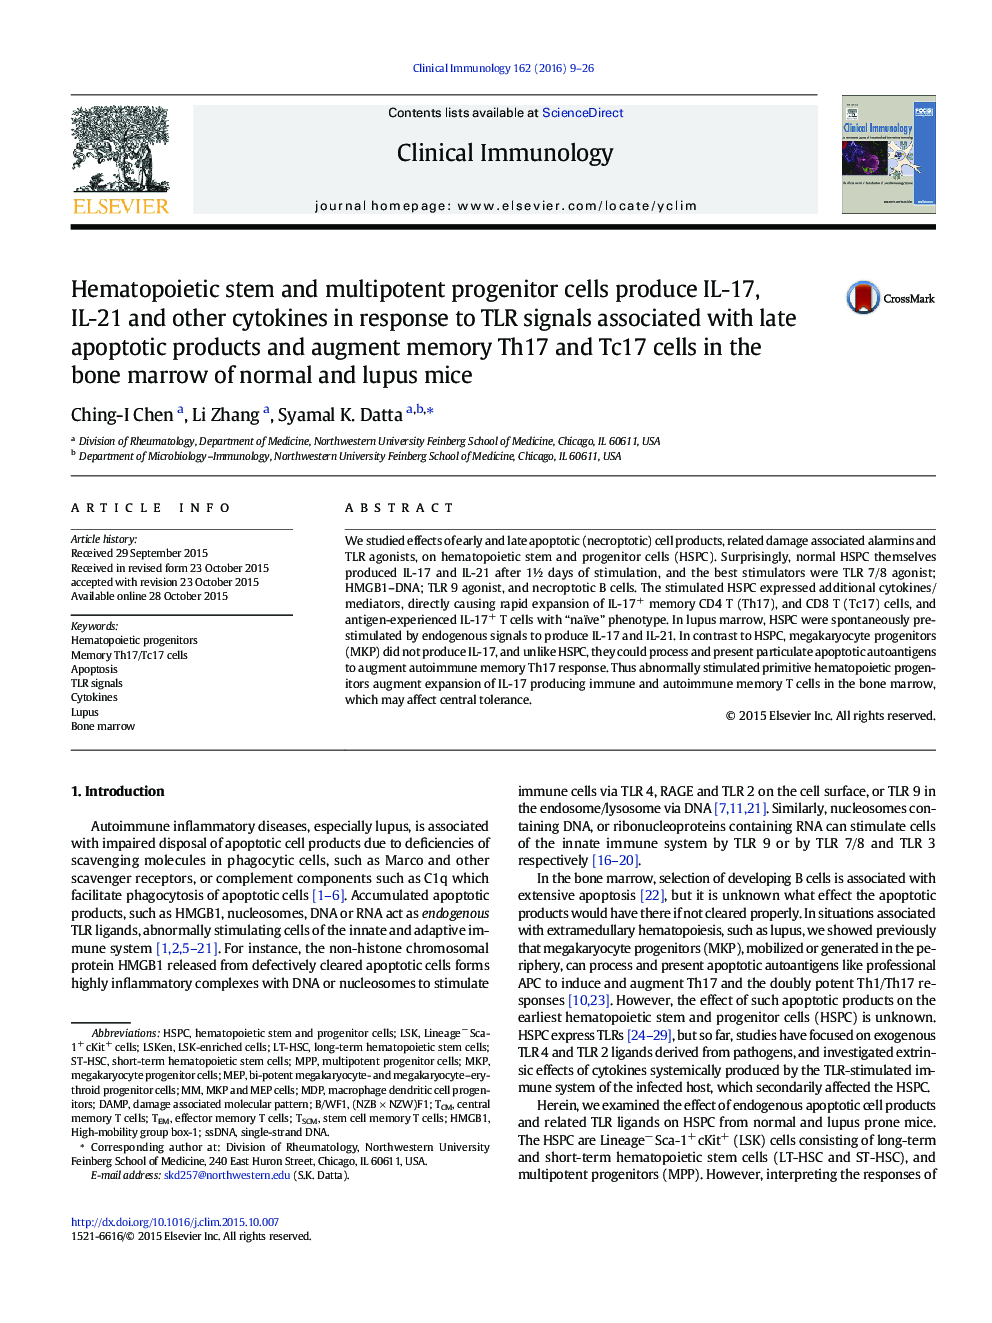 Hematopoietic stem and multipotent progenitor cells produce IL-17, IL-21 and other cytokines in response to TLR signals associated with late apoptotic products and augment memory Th17 and Tc17 cells in the bone marrow of normal and lupus mice